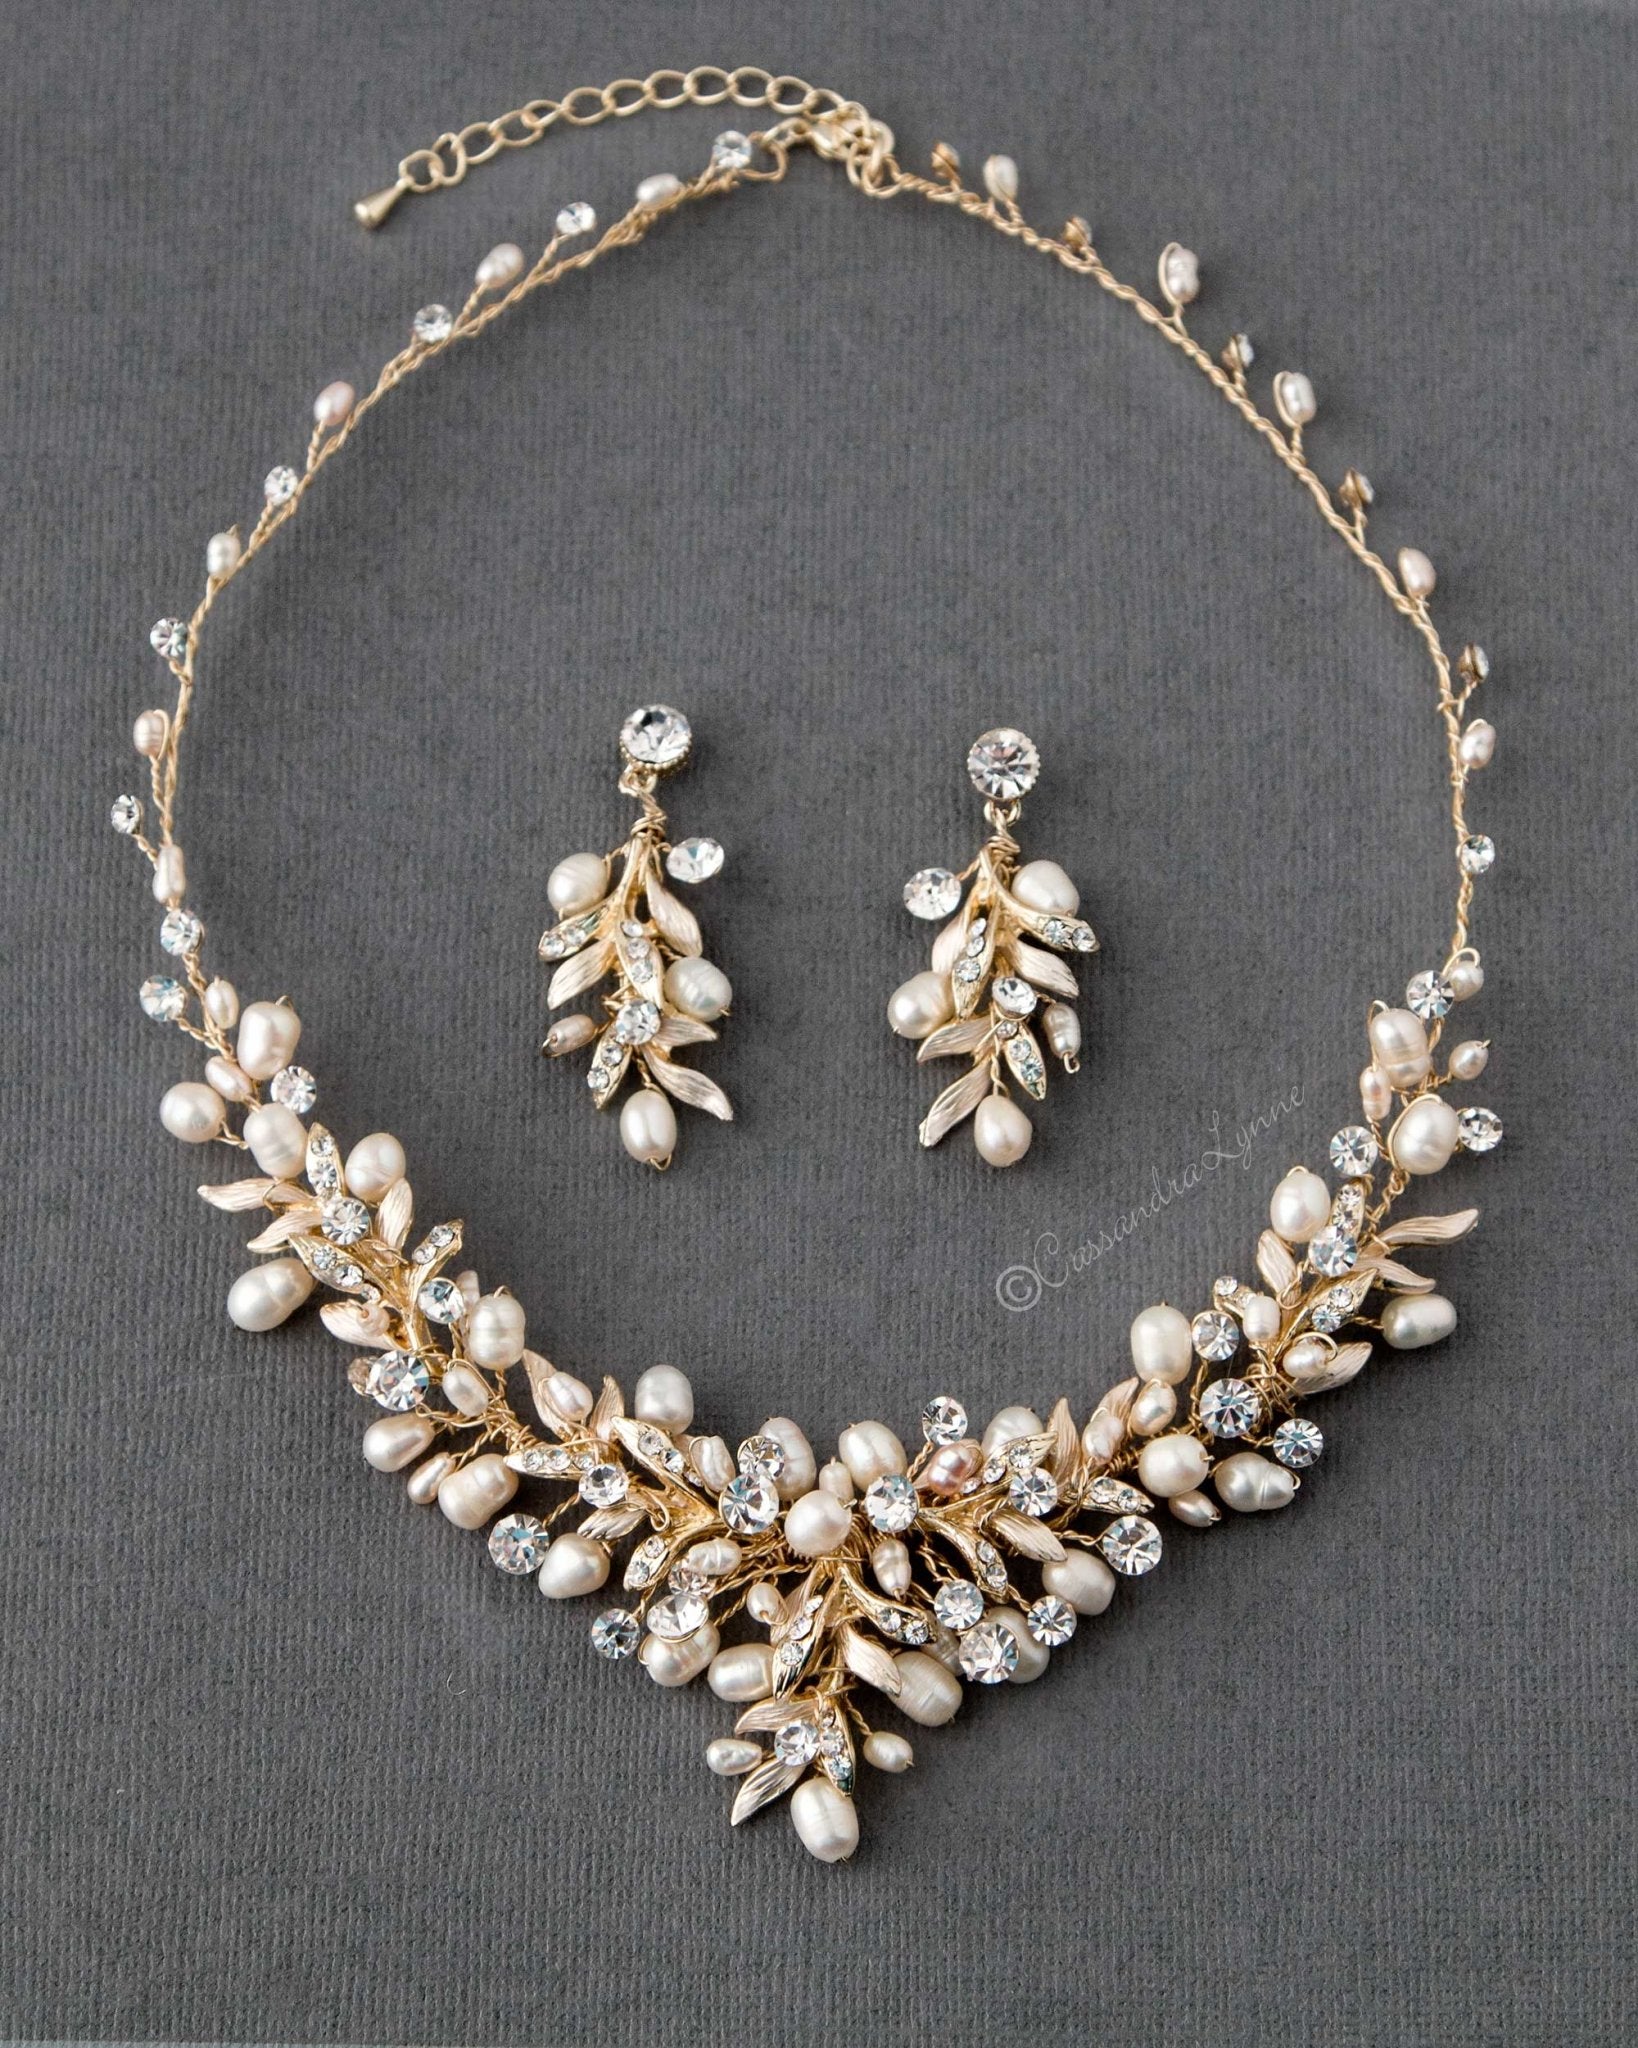 Bridal Necklace Set of Pearls and Crystals - Cassandra Lynne